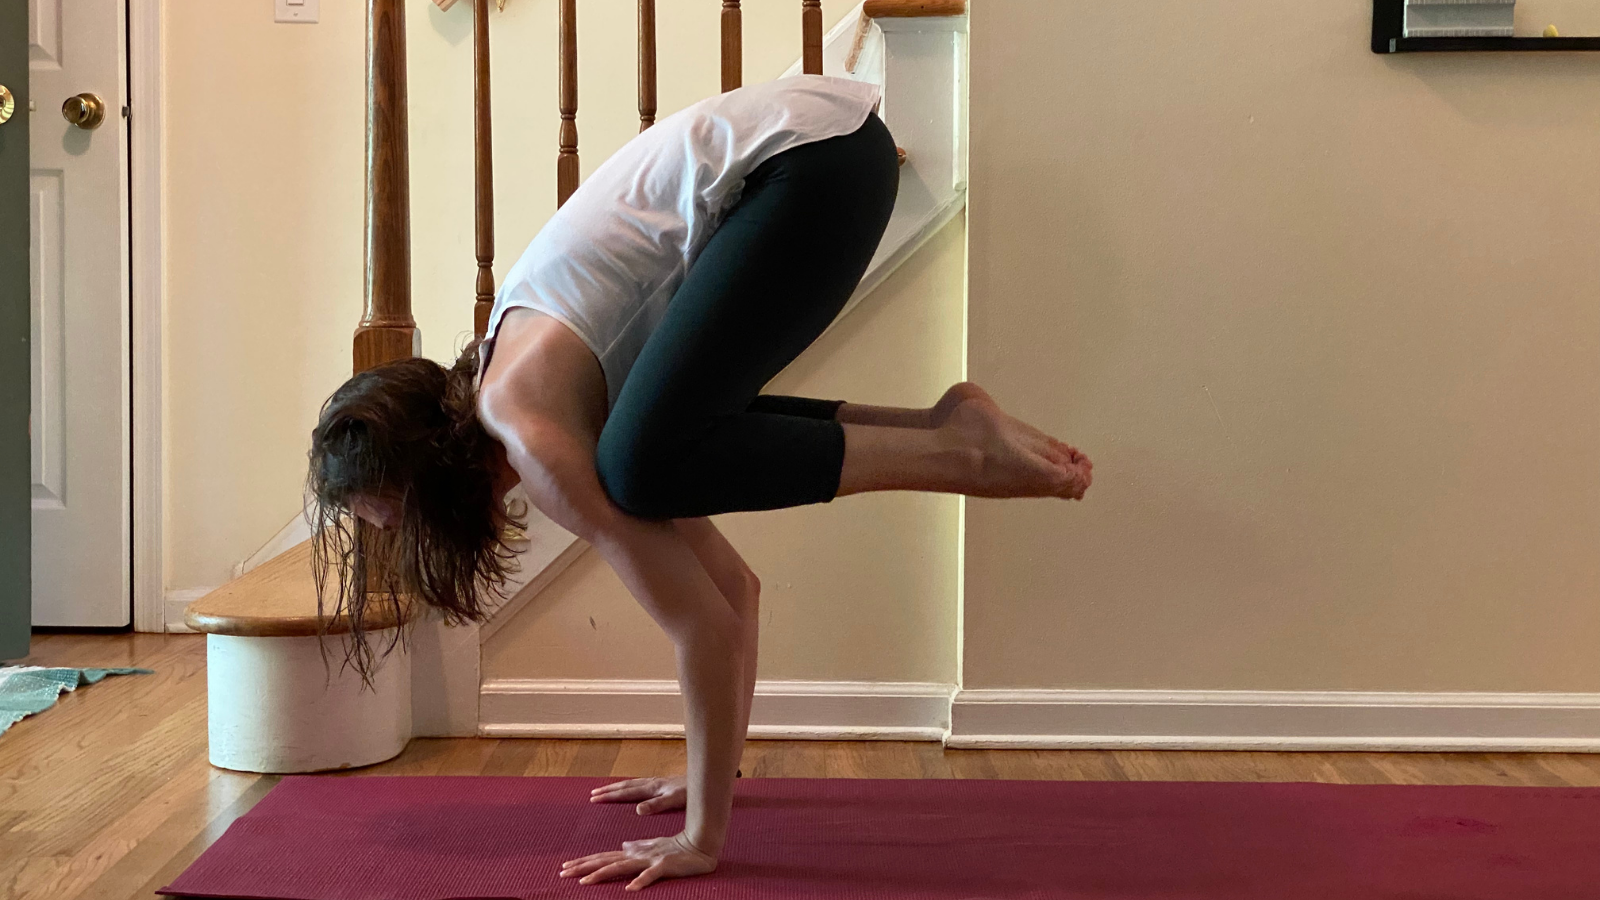 Crow Pose is also know as Bakasana is a challenging arm balance pose requiring agility and core strength.